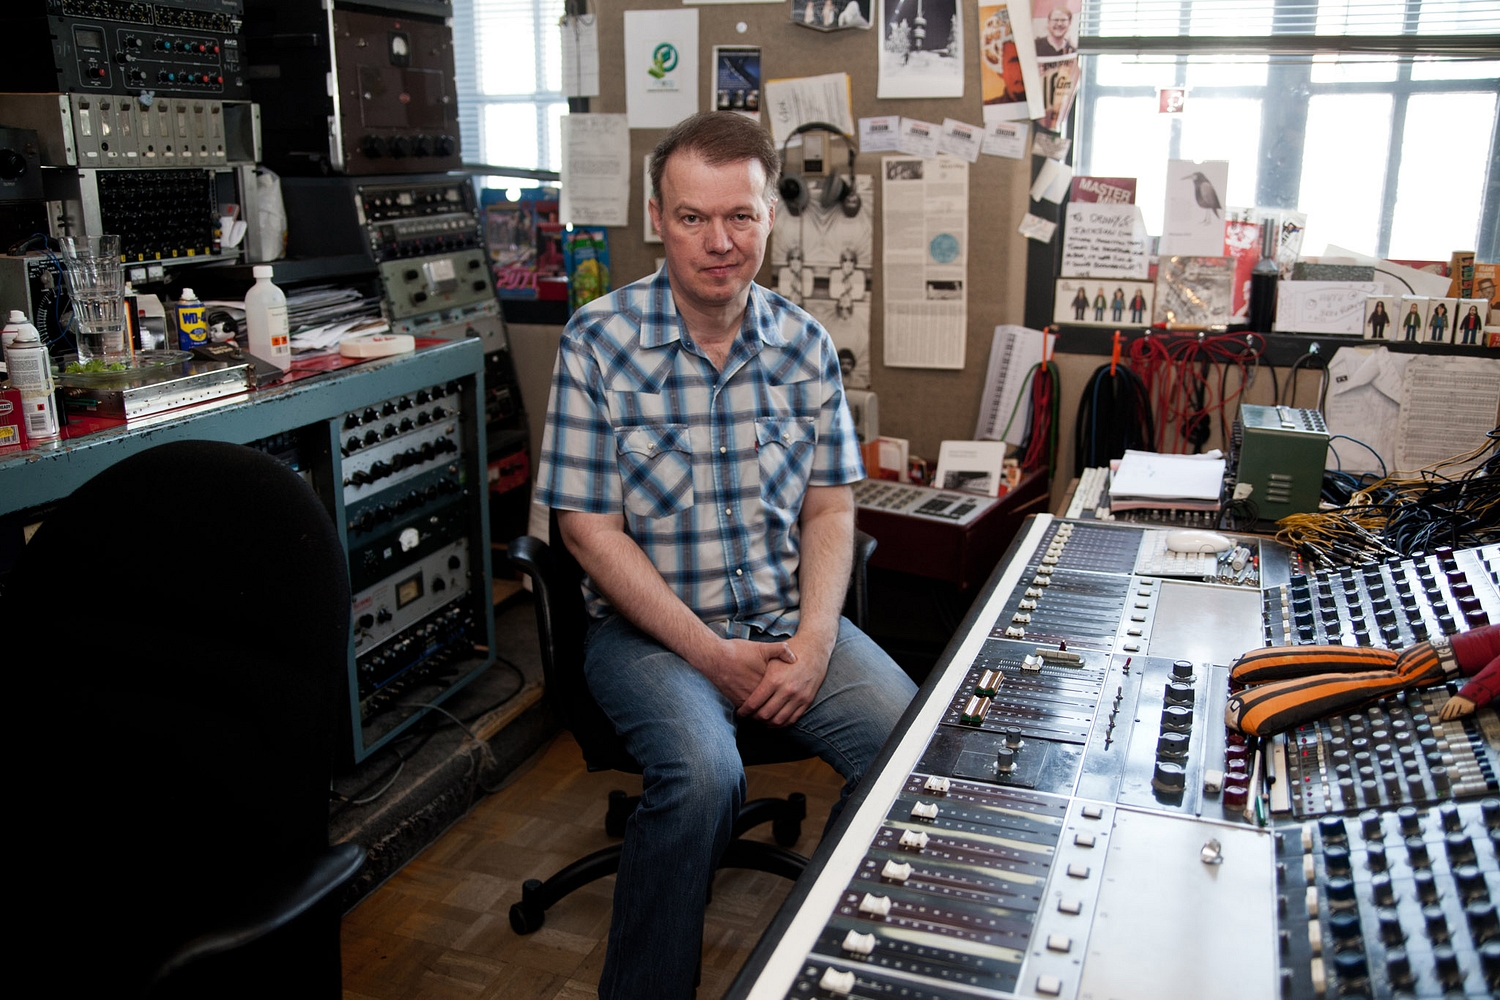 Edwyn Collins’ soundtrack album for The Possibilities Are Endless due in November